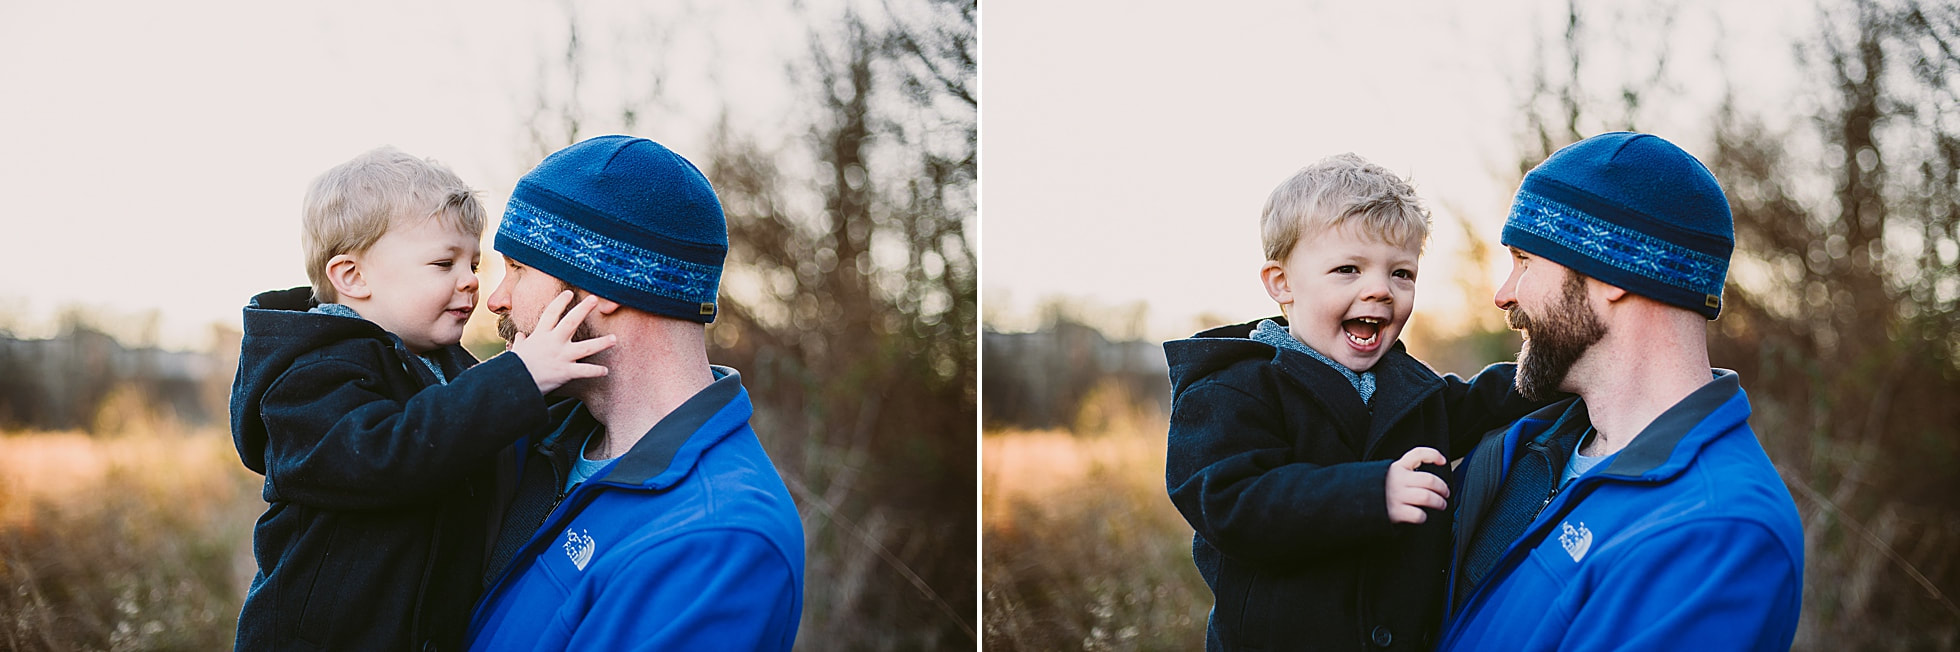 Father-son images from a family session in Roanoke, Virginia, by Laura Richards Photography